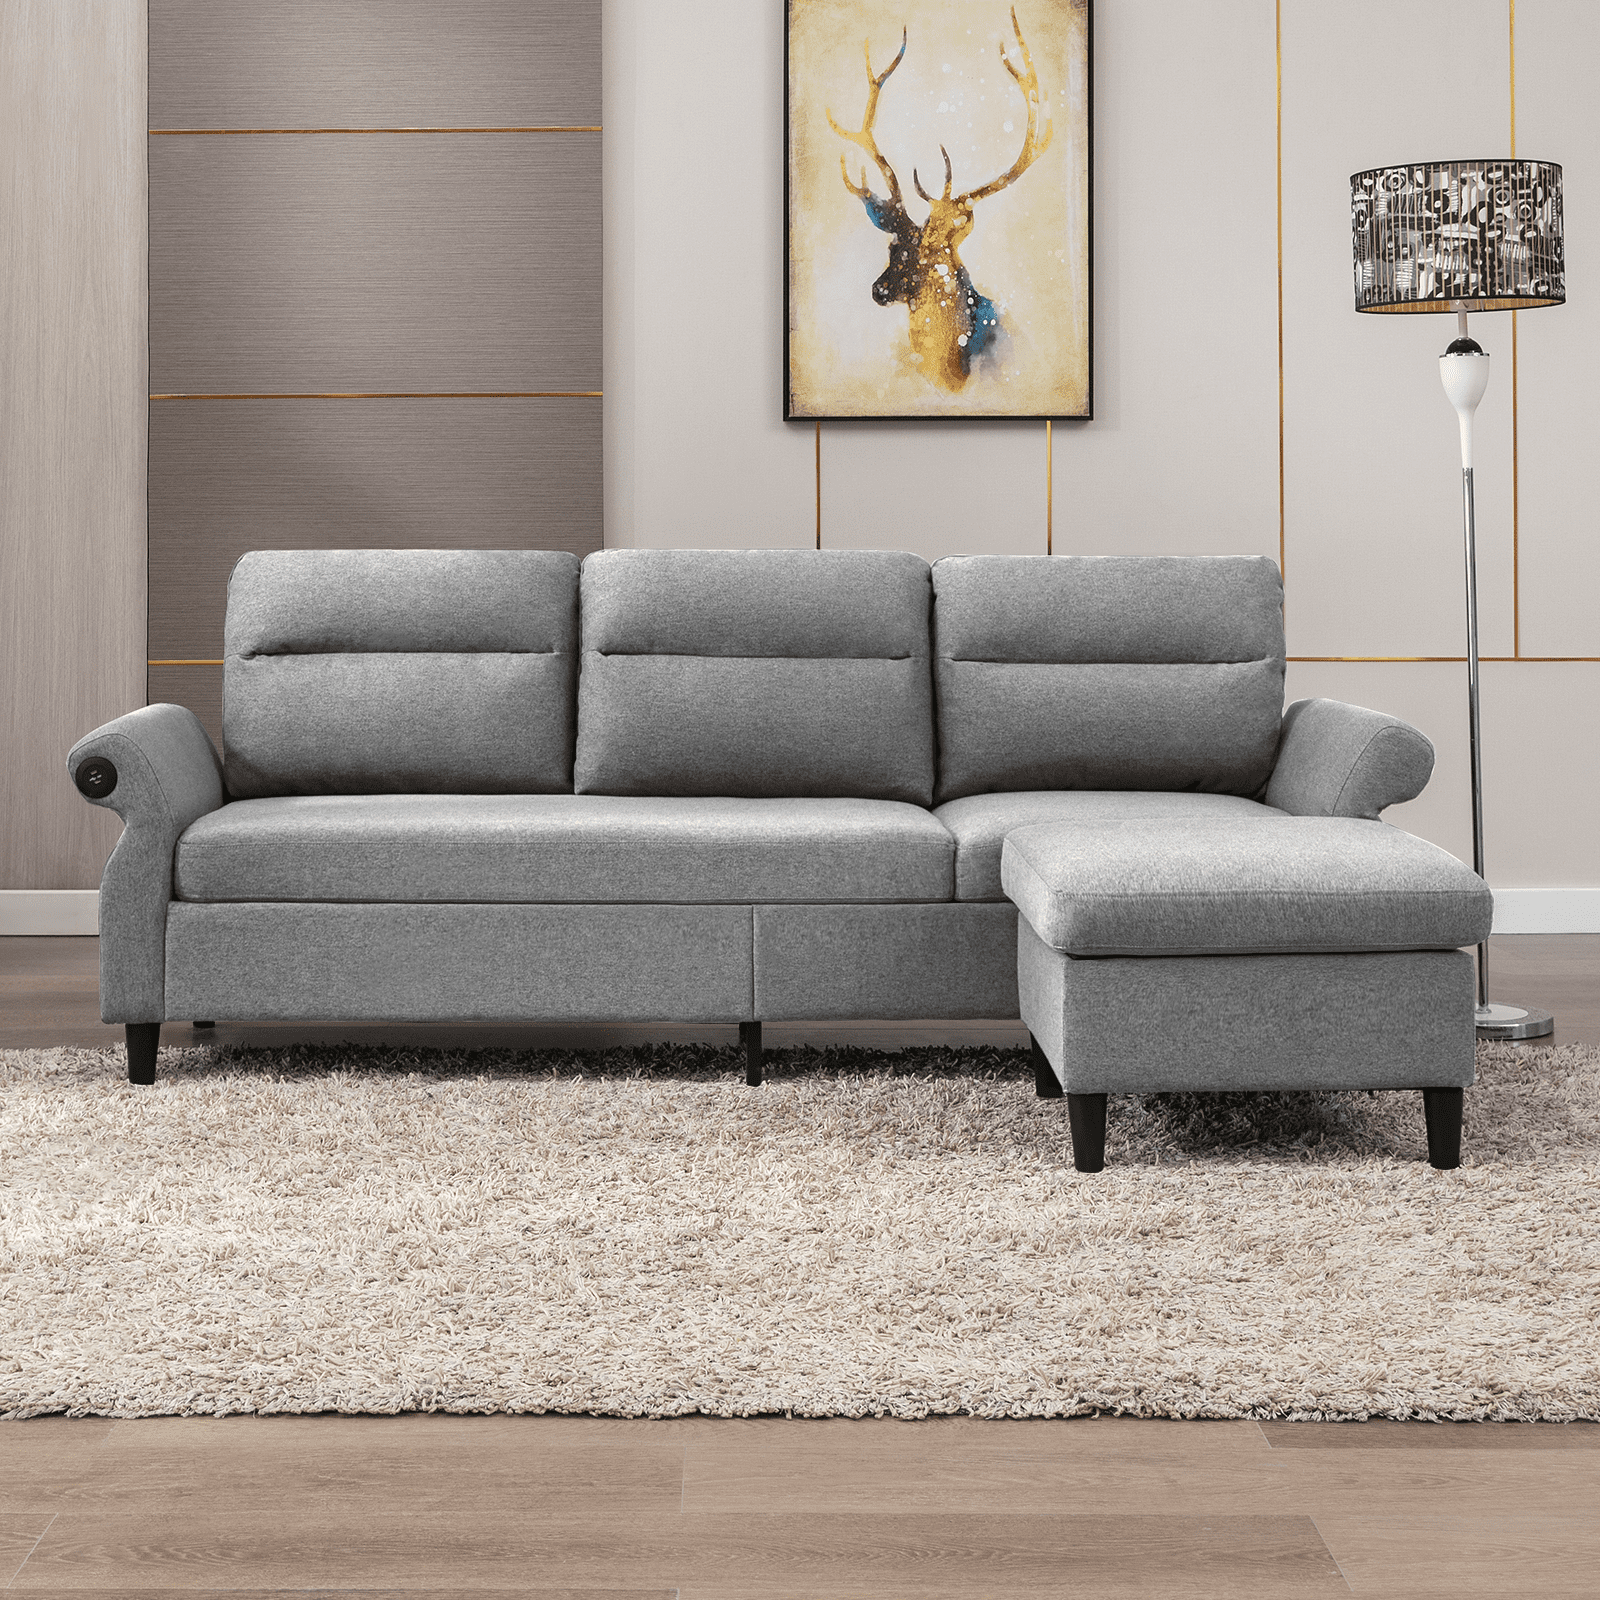 Muzz Convertible Sectional Sofa Couch, 3 Seat L Shape Sofa Couch With 2 Usb  Ports And Adjustable Armrest, Small Reversible Sectional Couches With  Ottoman For Living Room, Apartment, Light Grey – Walmart Regarding 3 Seat Convertible Sectional Sofas (Photo 15 of 15)